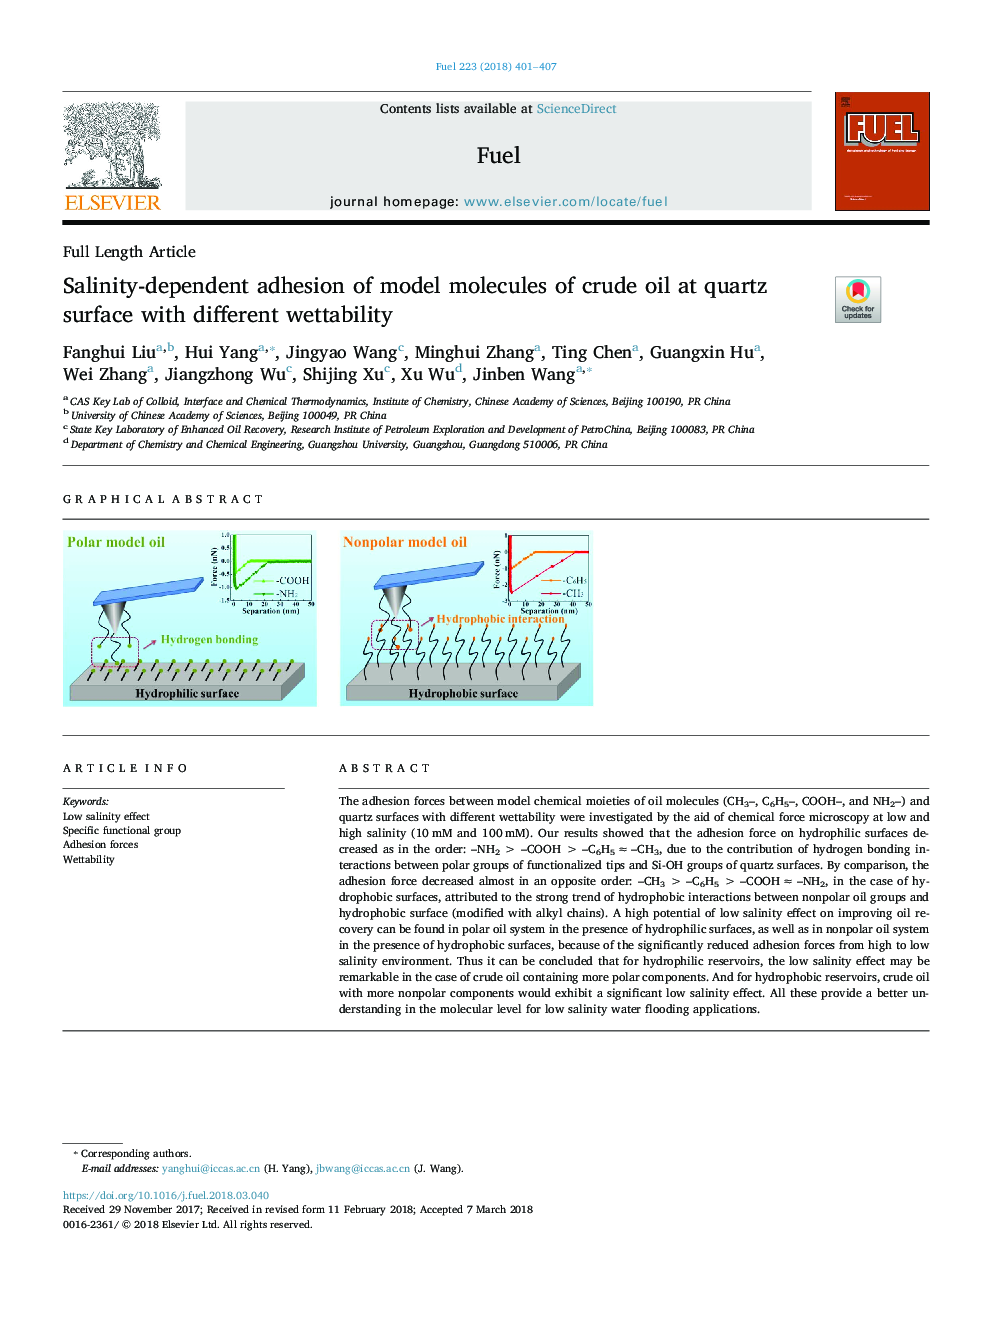 Salinity-dependent adhesion of model molecules of crude oil at quartz surface with different wettability